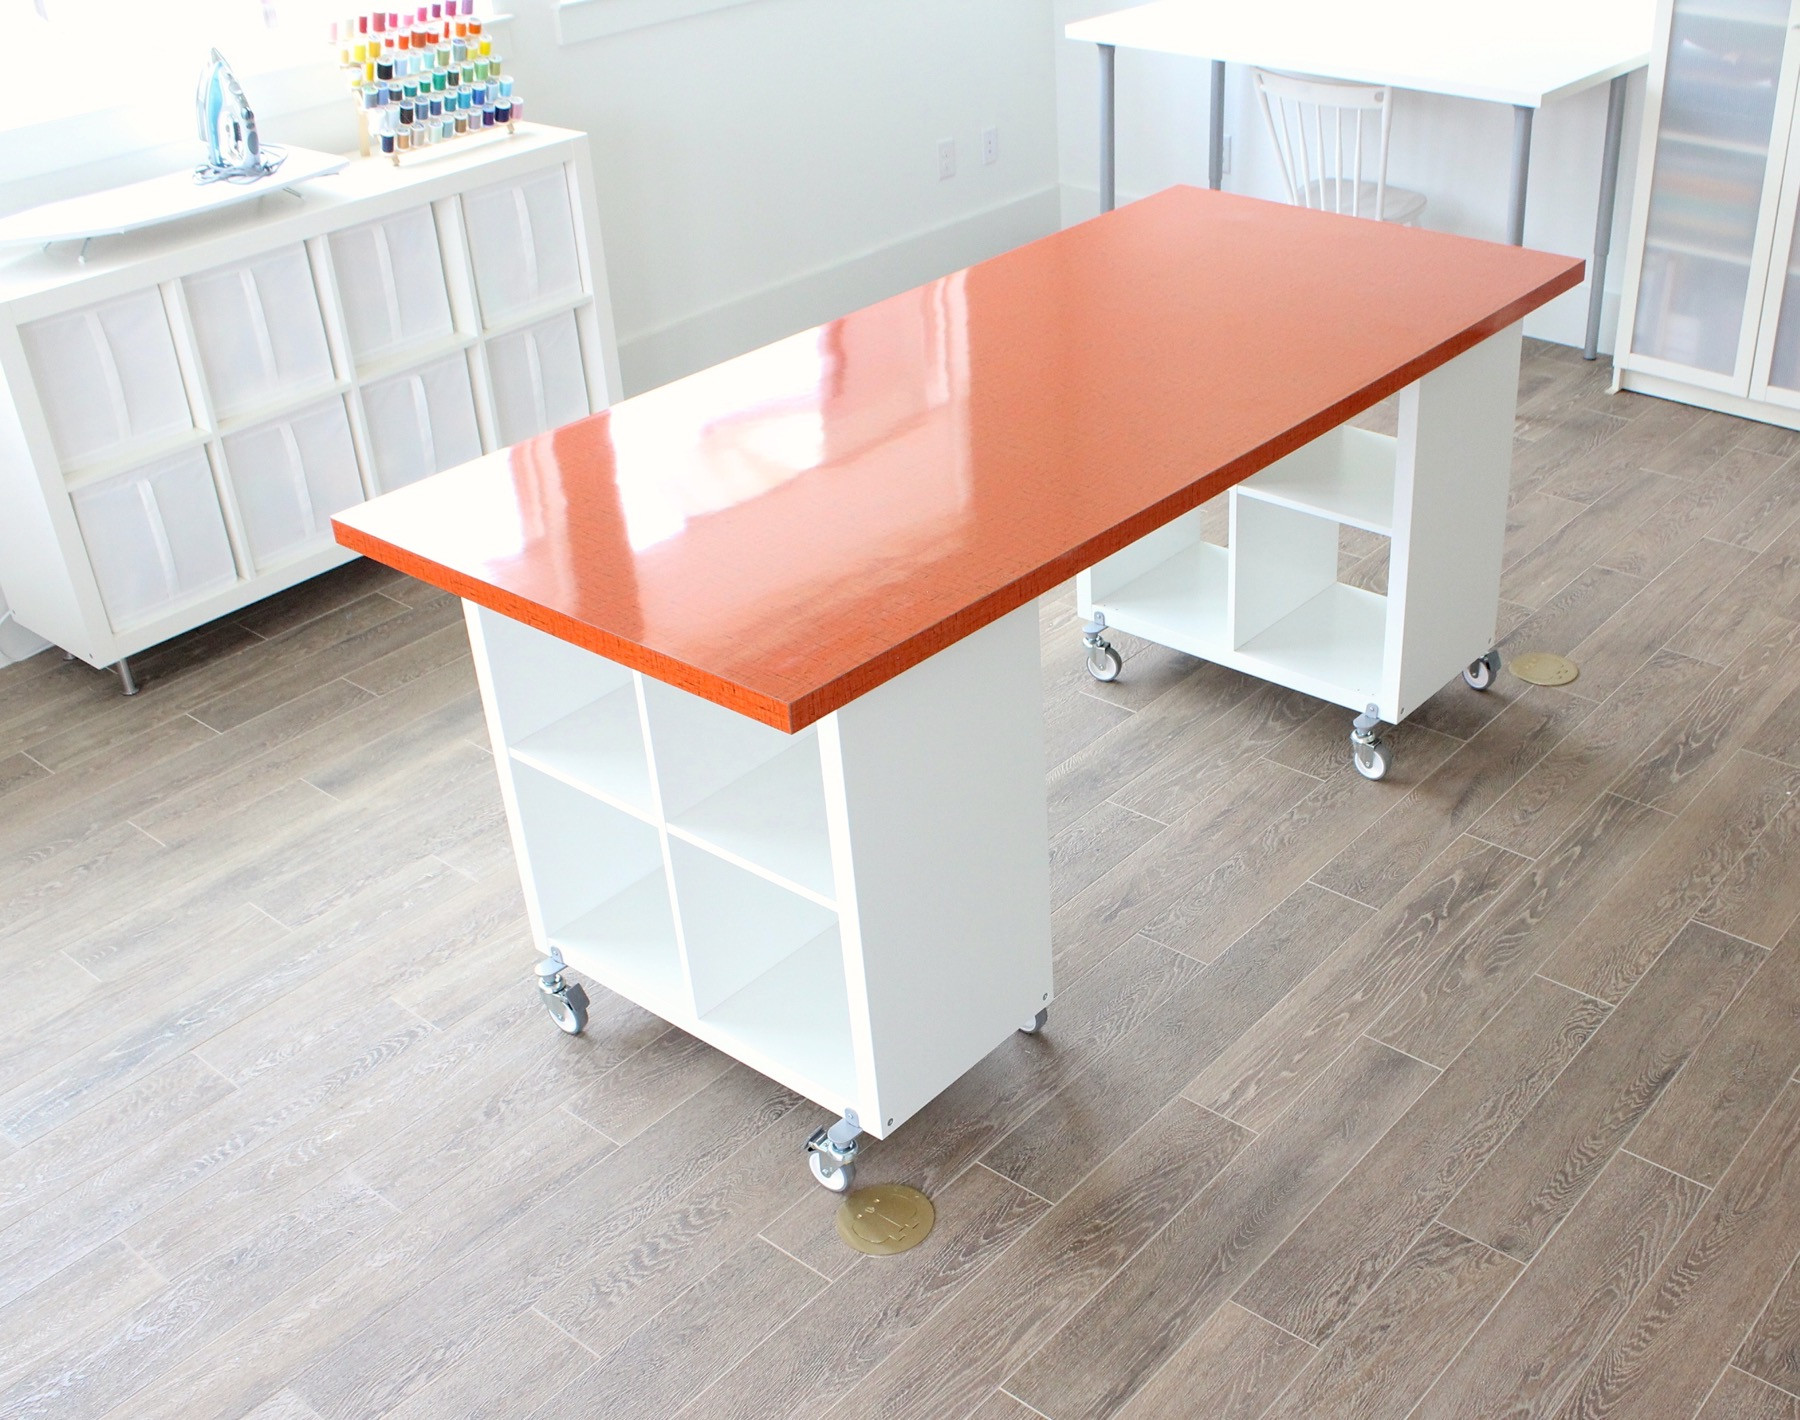 DIY Kids Craft Table
 Building a new home the Formica craft table – MADE EVERYDAY